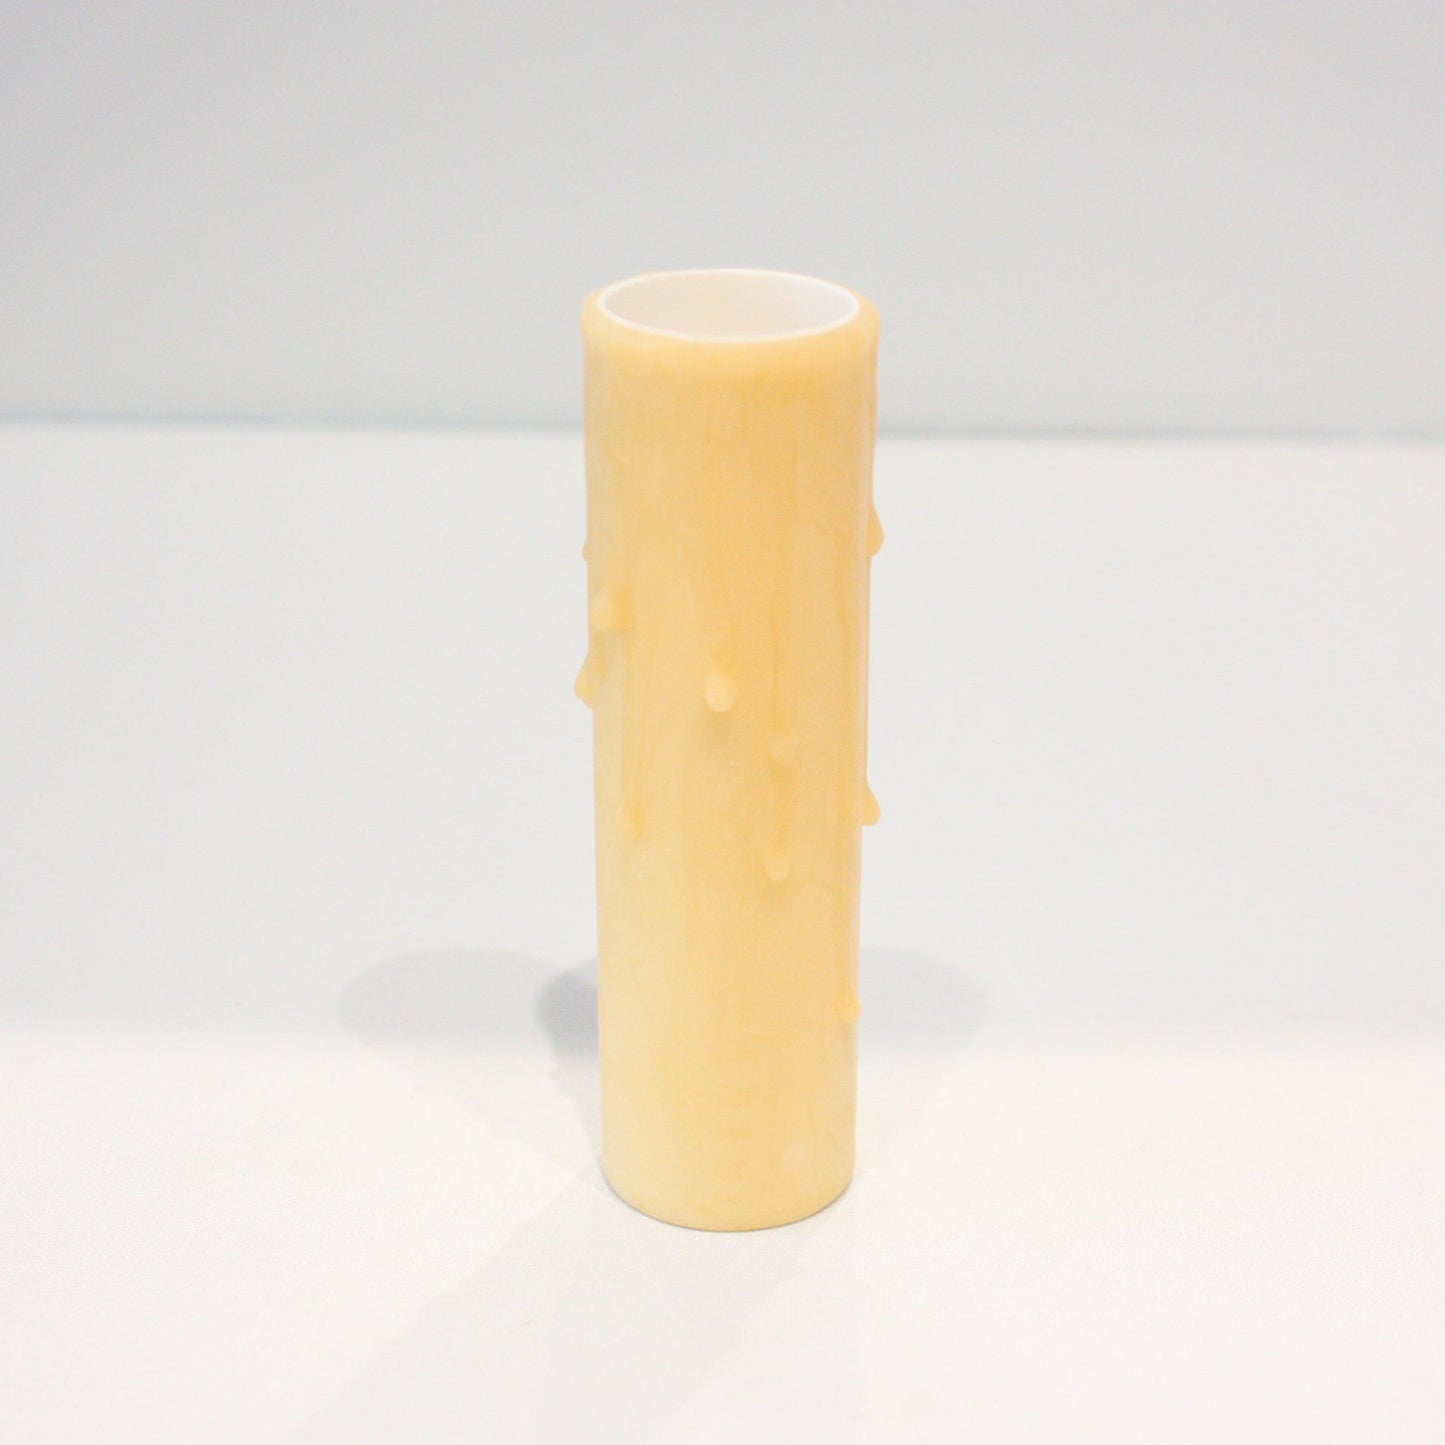 4" Beeswax Candle Cover w/ Drip, European Base